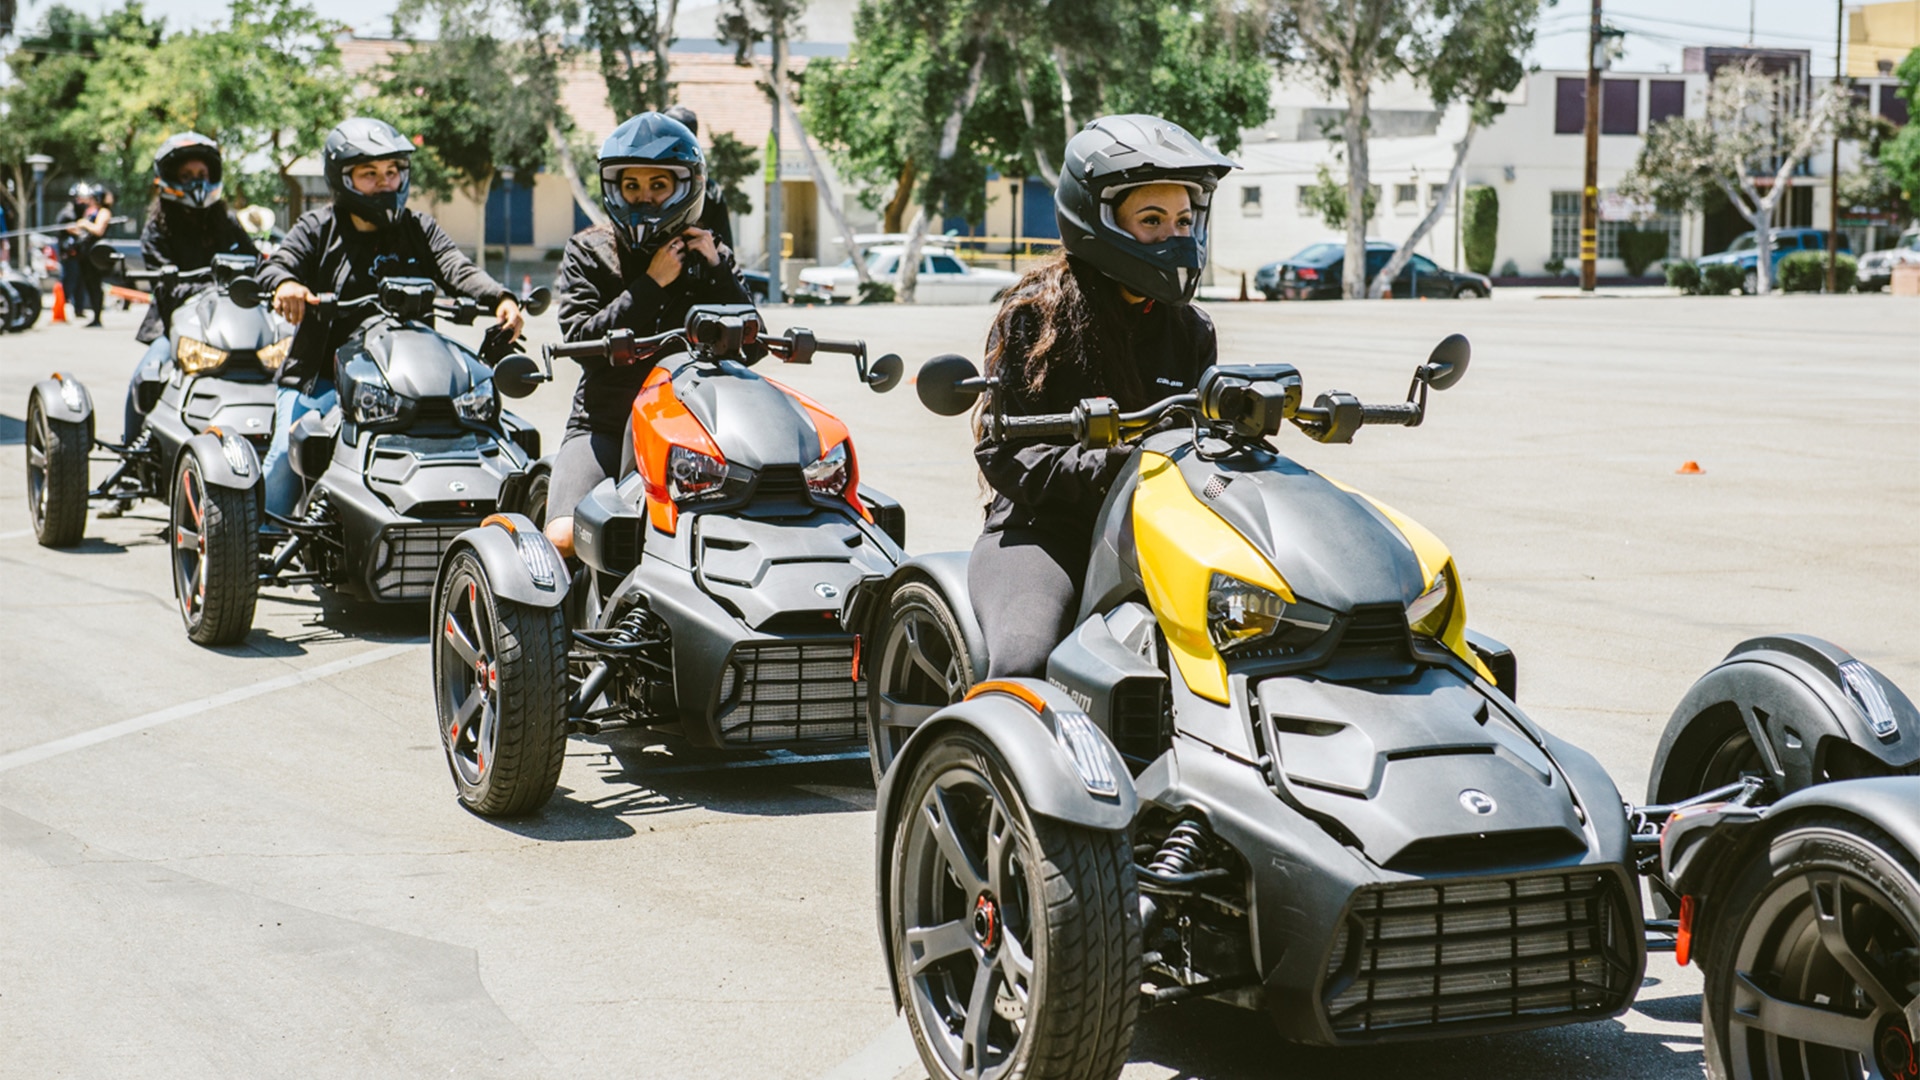 Multiple women taking a Rider Education Program course to learn to drive 3-wheel Can-Am vehicles